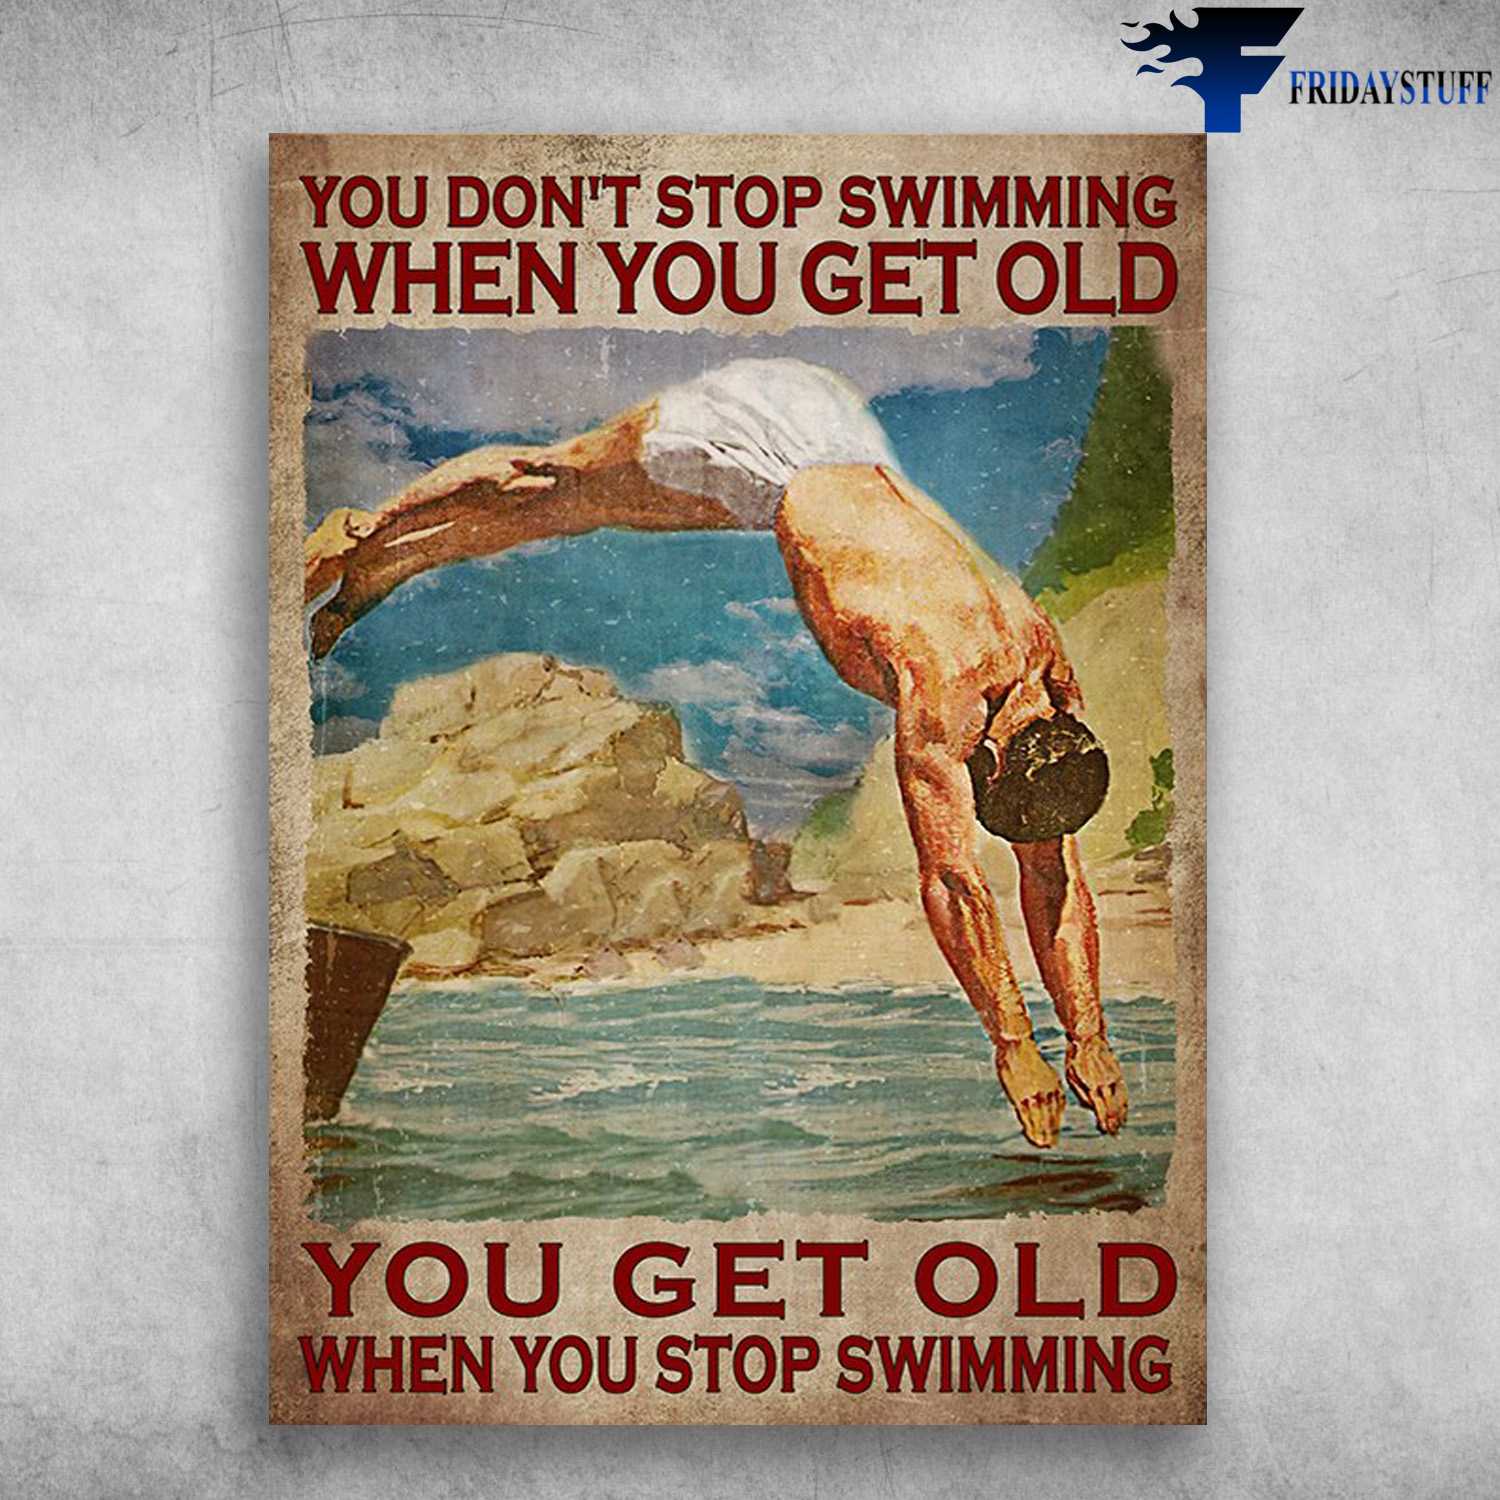 Swimming Man - You Don't Stop Swimming When You Get Old, You Get Old When You Stop Swimming